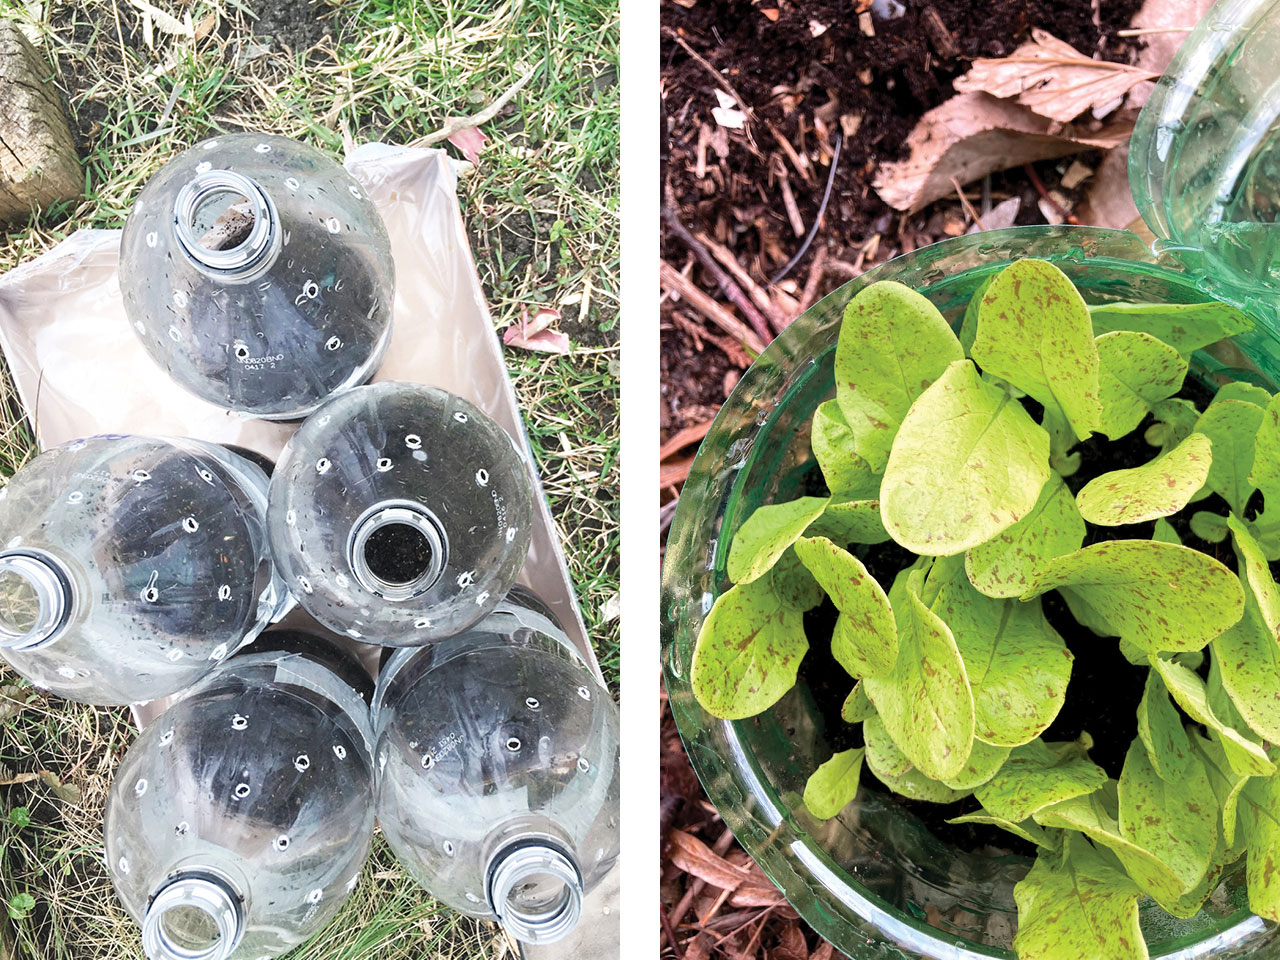 left, bottles with dirt filled with seedlings; right, the mature seedlings ready for transplant